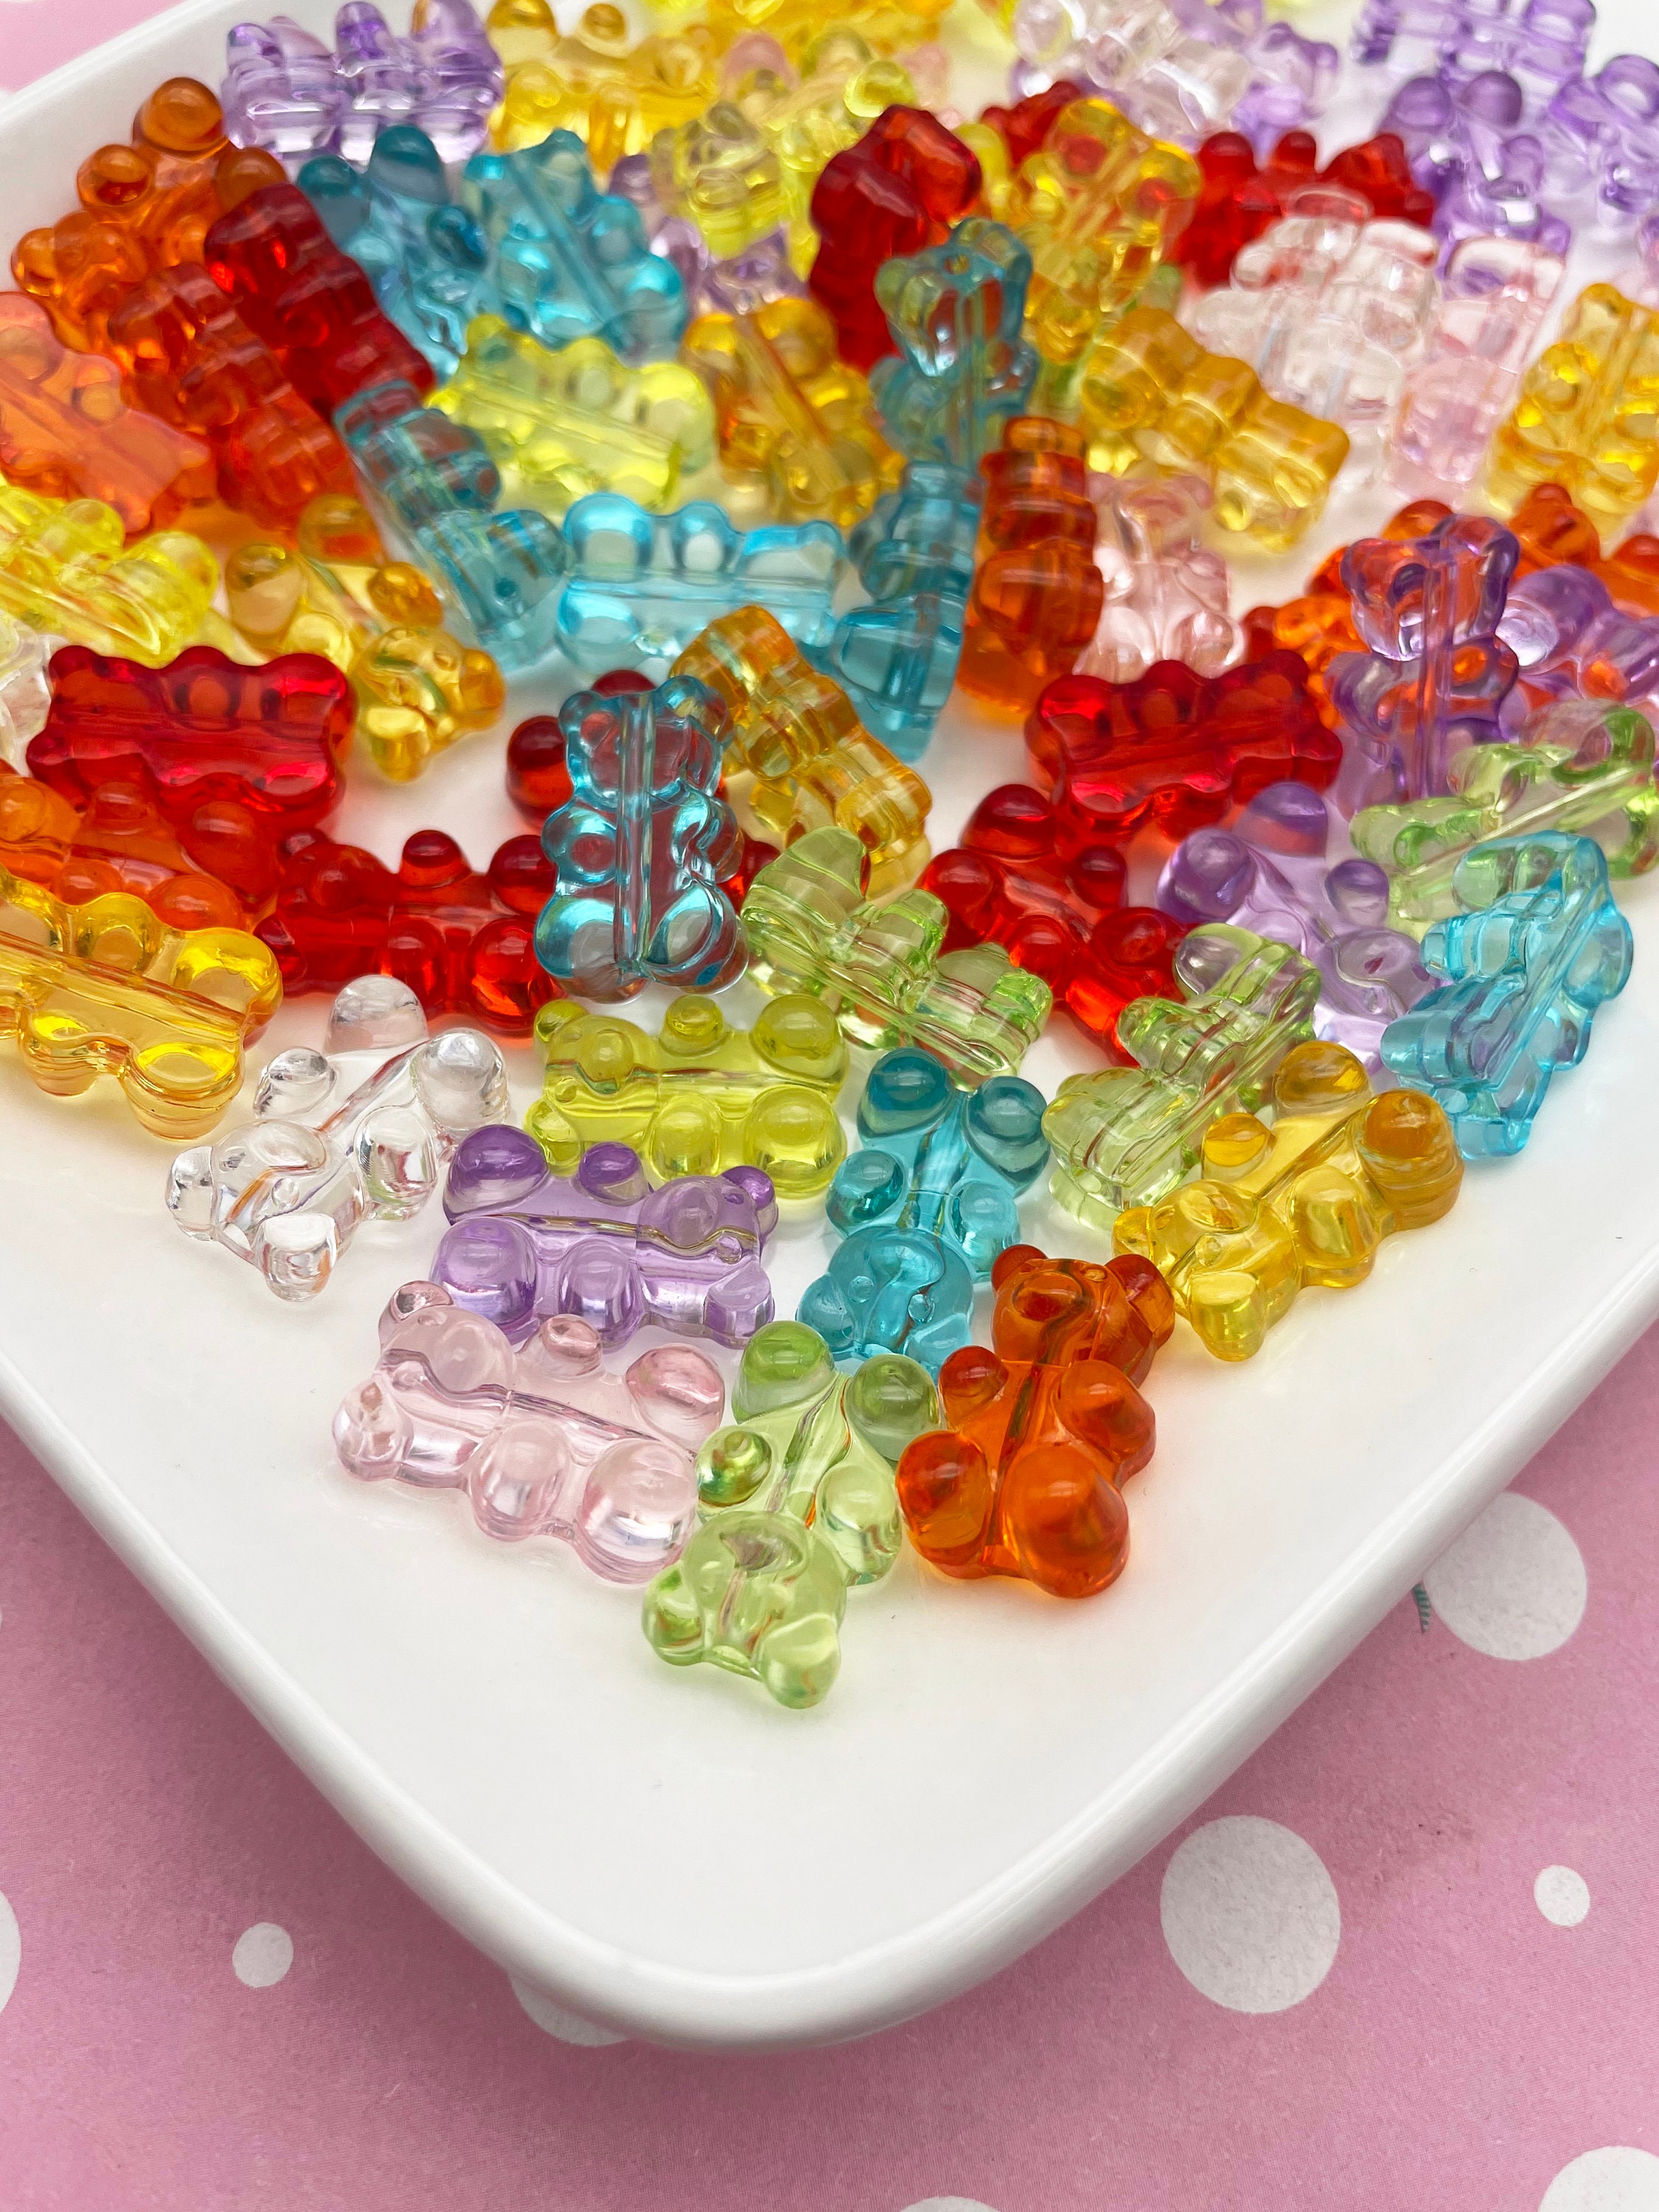 10 grids Resin Gummy Bear Pendant Charms For Jewelry Making Kits